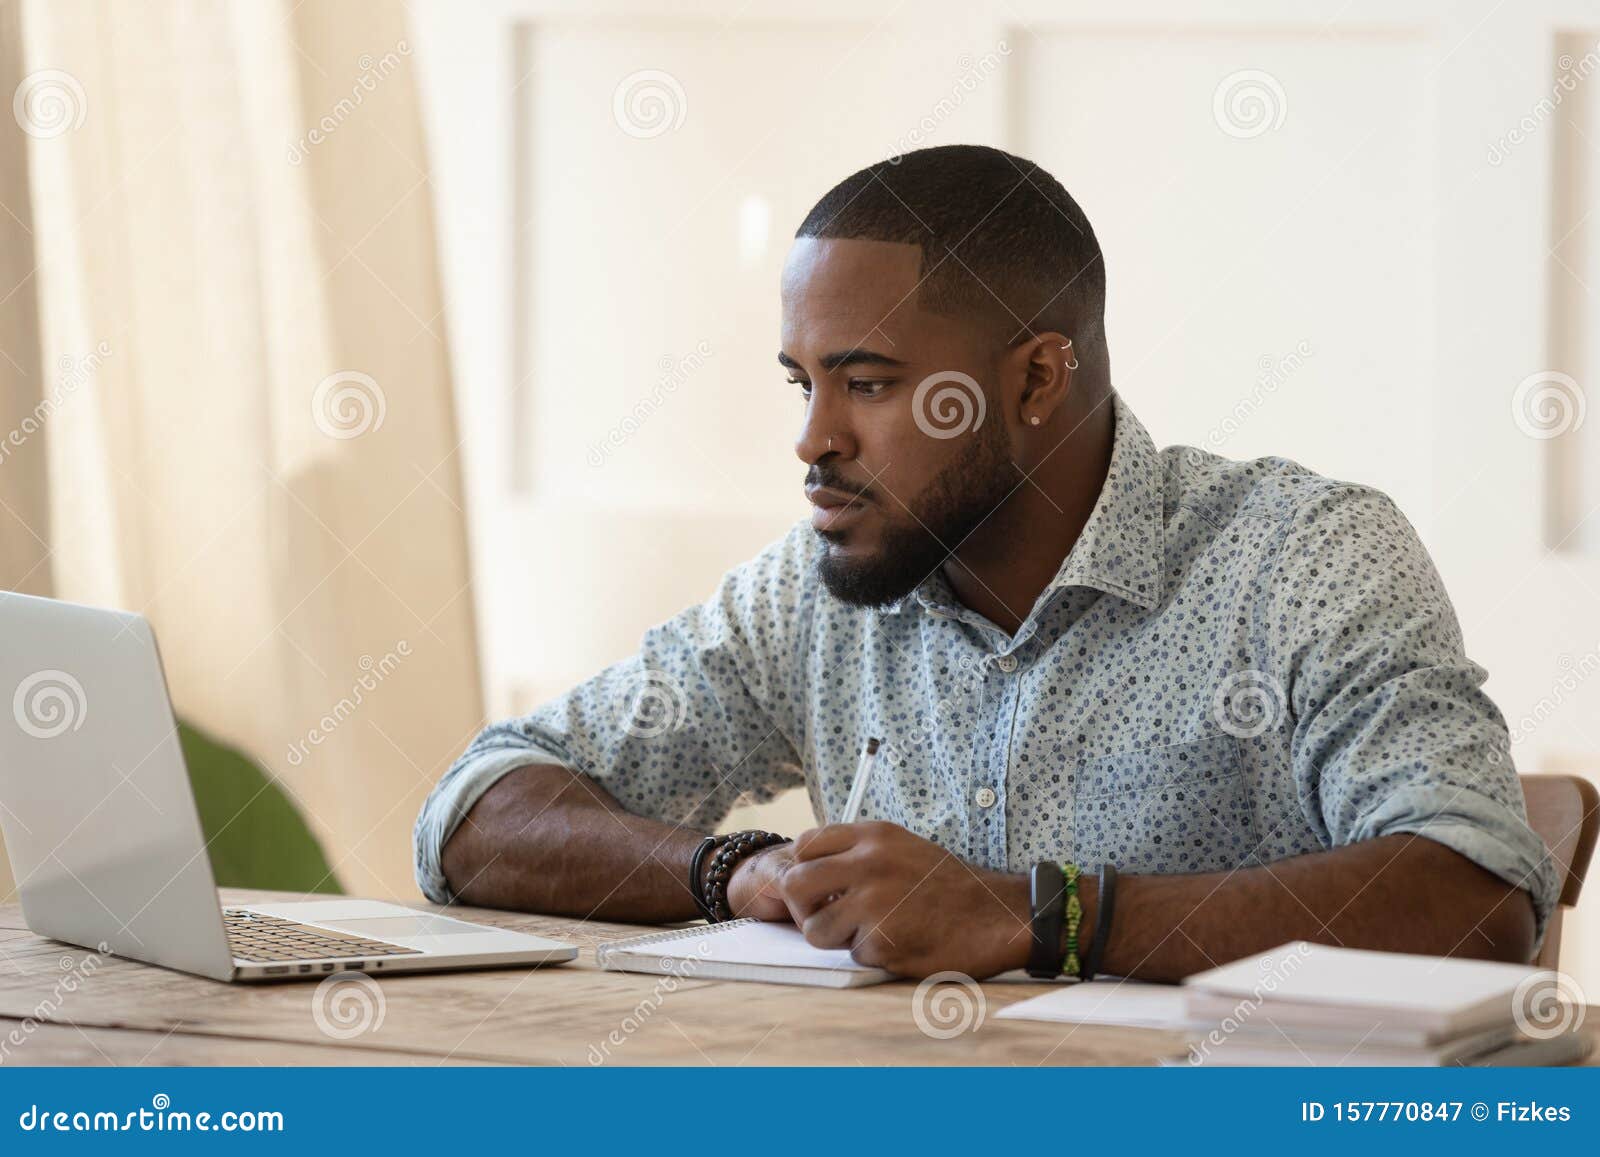 concentrated millennial african american guy focused on online university courses.